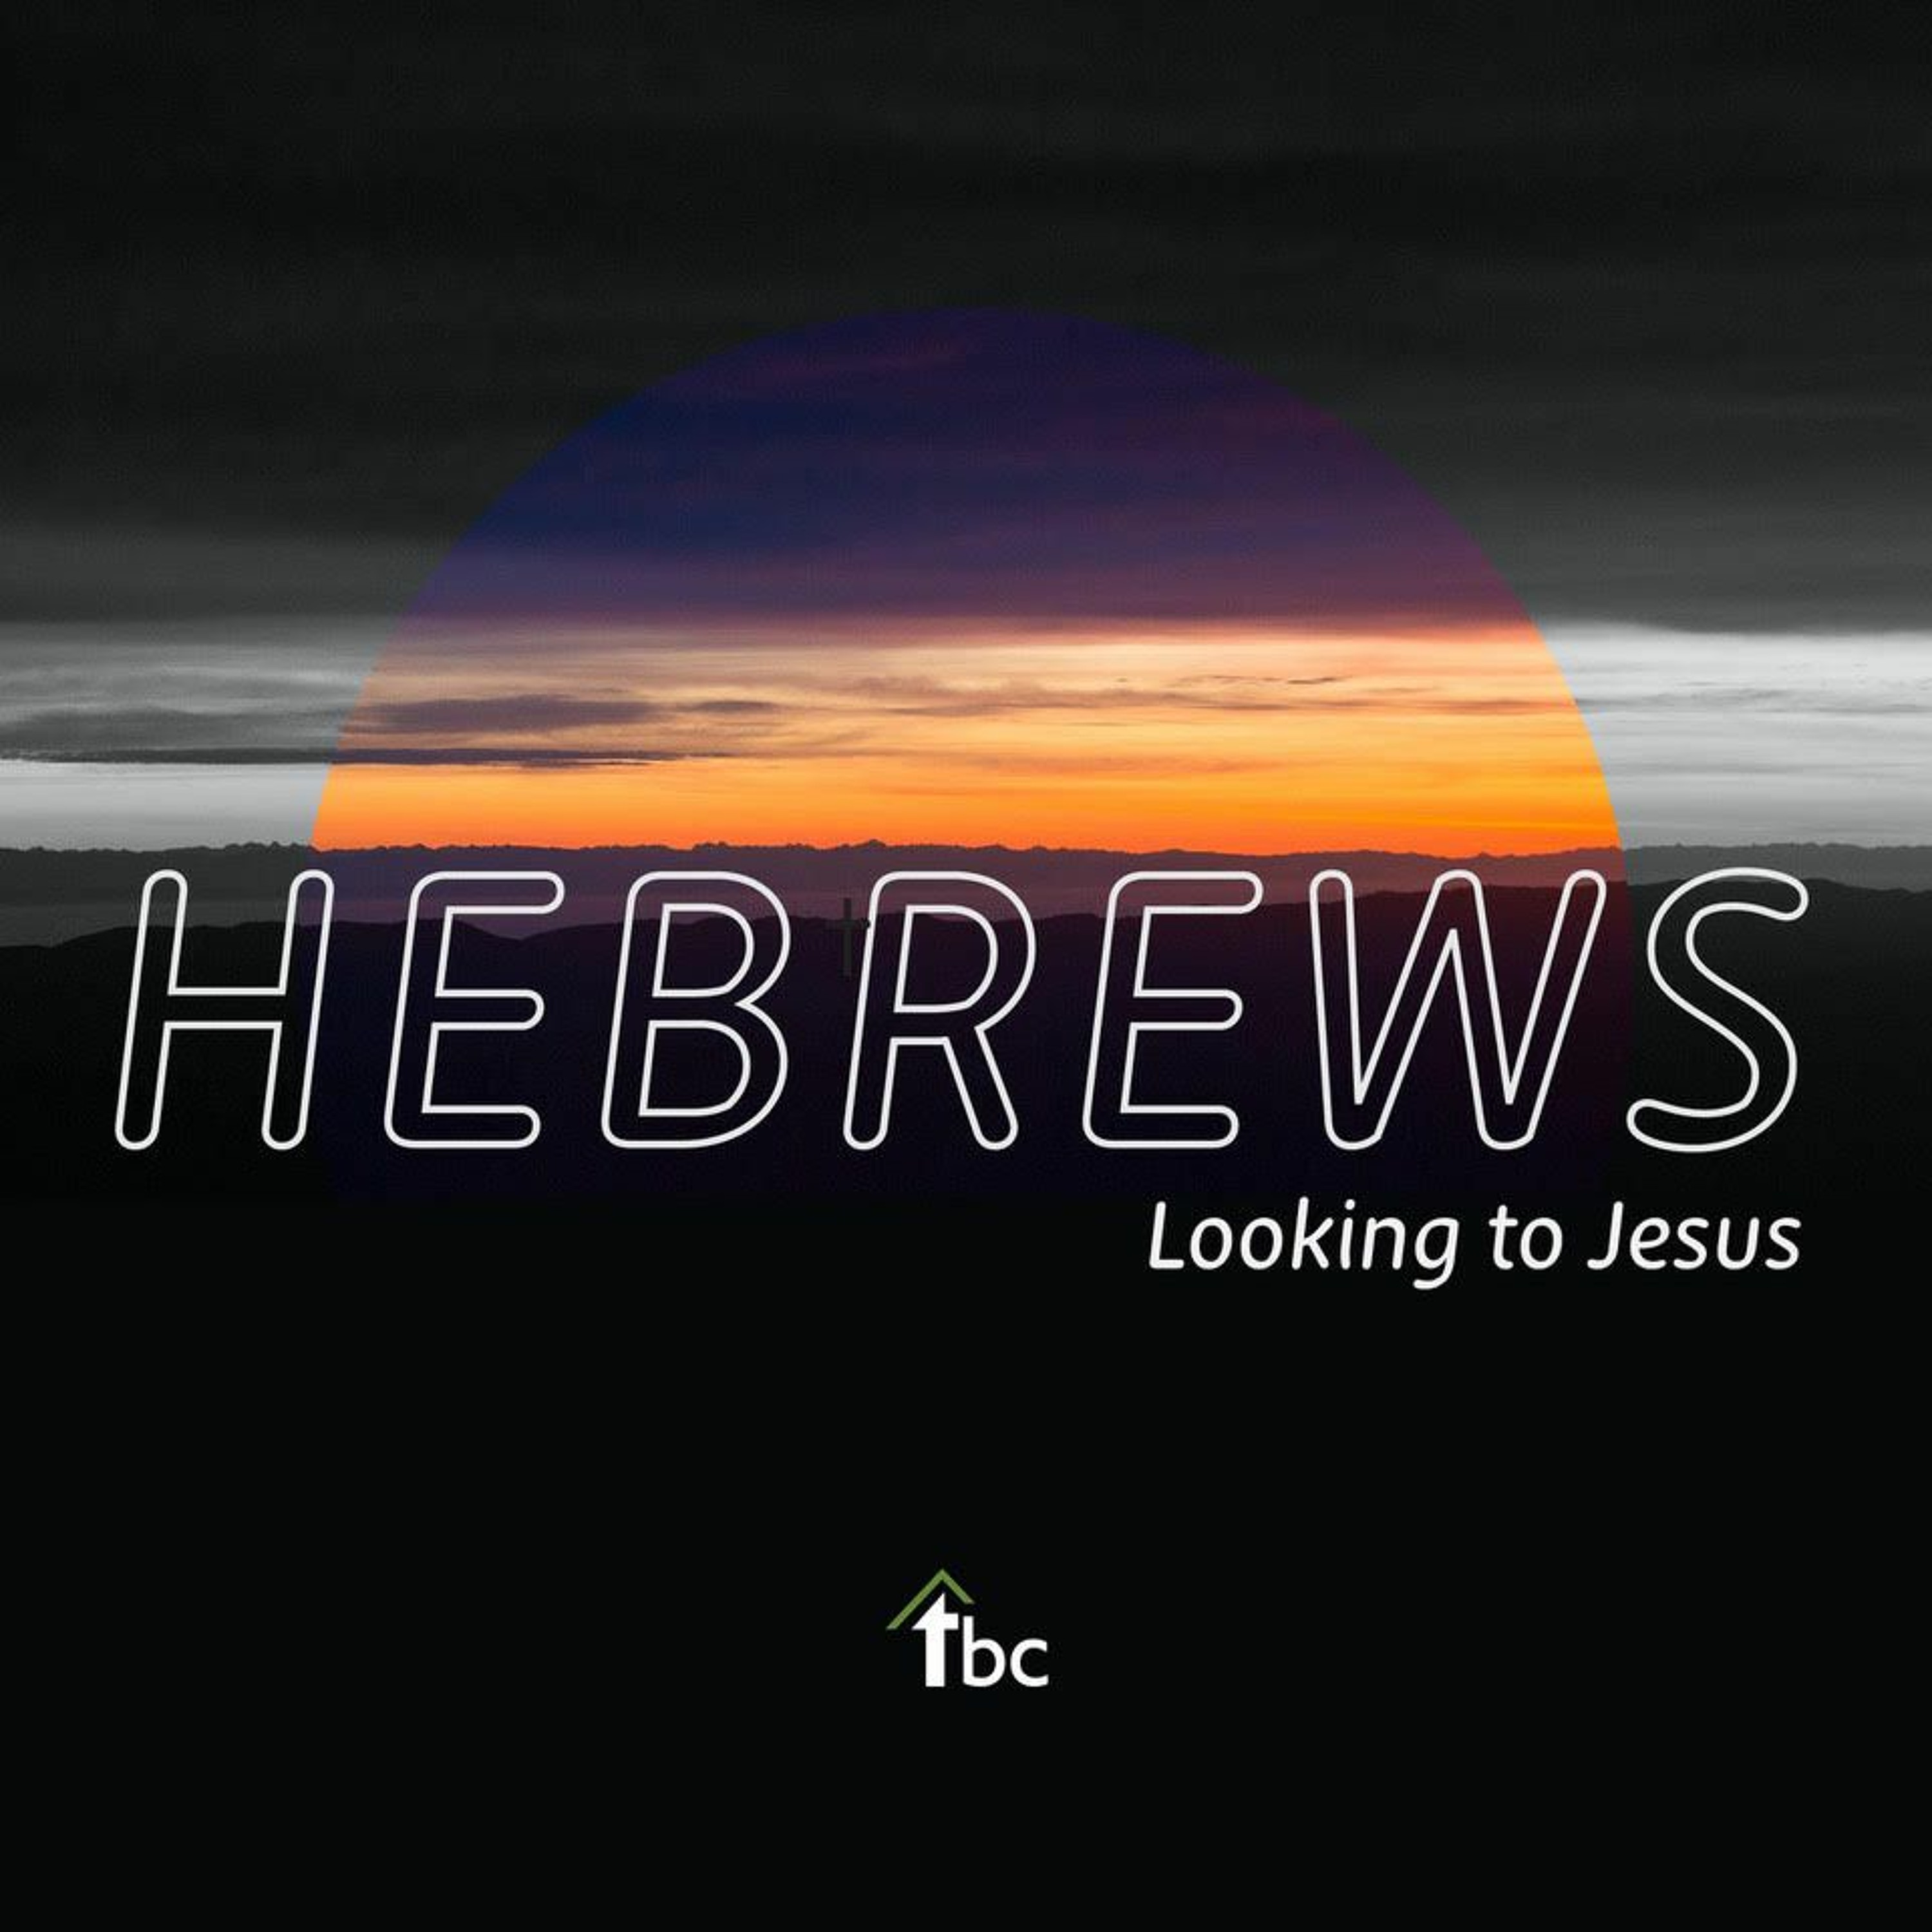 Delighting in Faith That Pleases God (Hebrews 11:1-6)